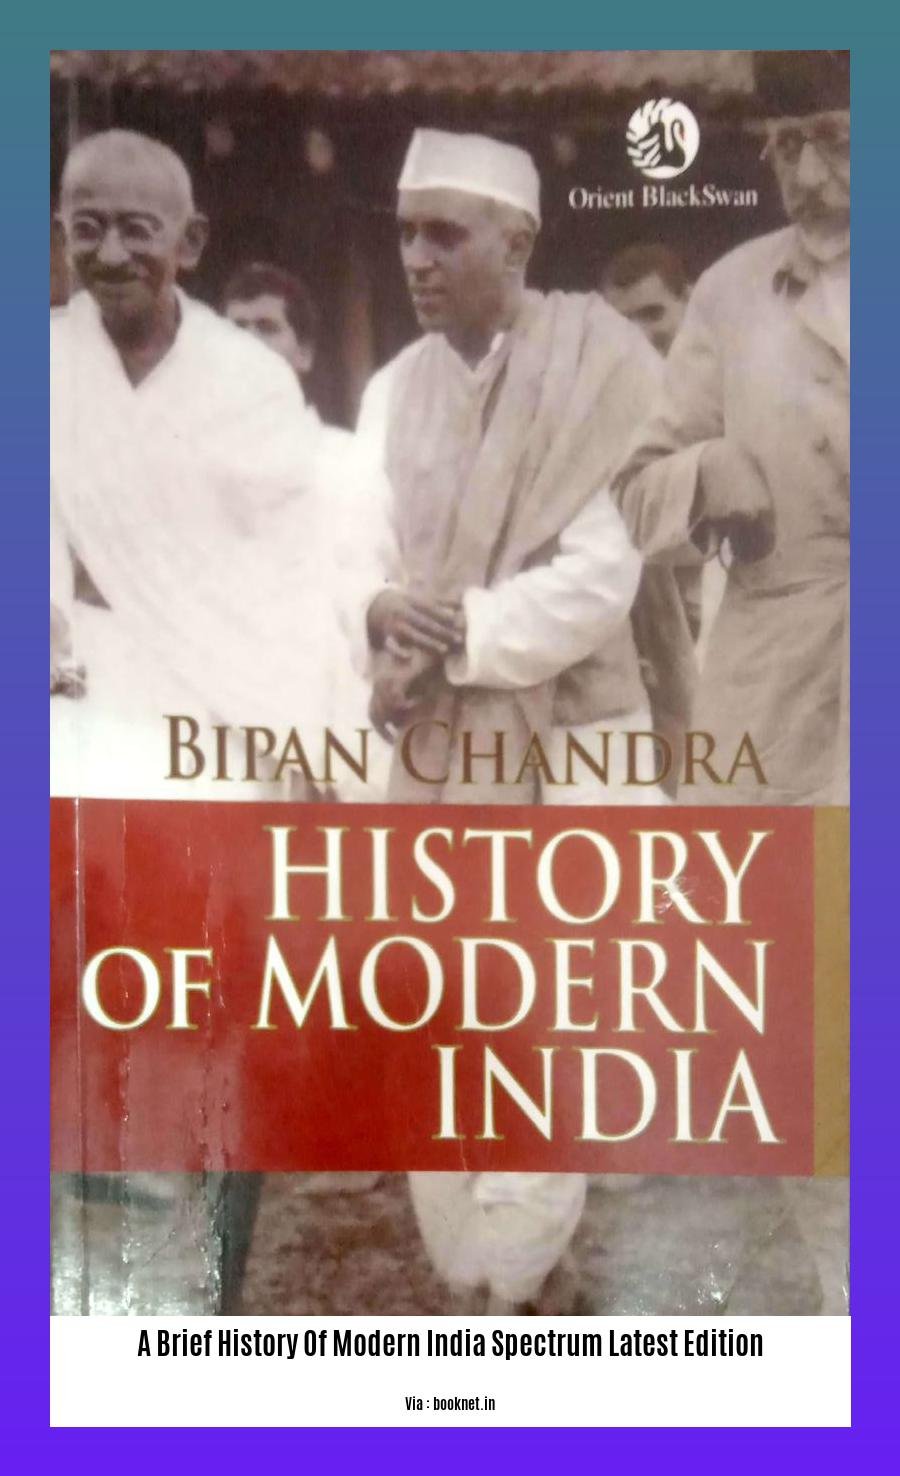 a brief history of modern india spectrum latest edition 2